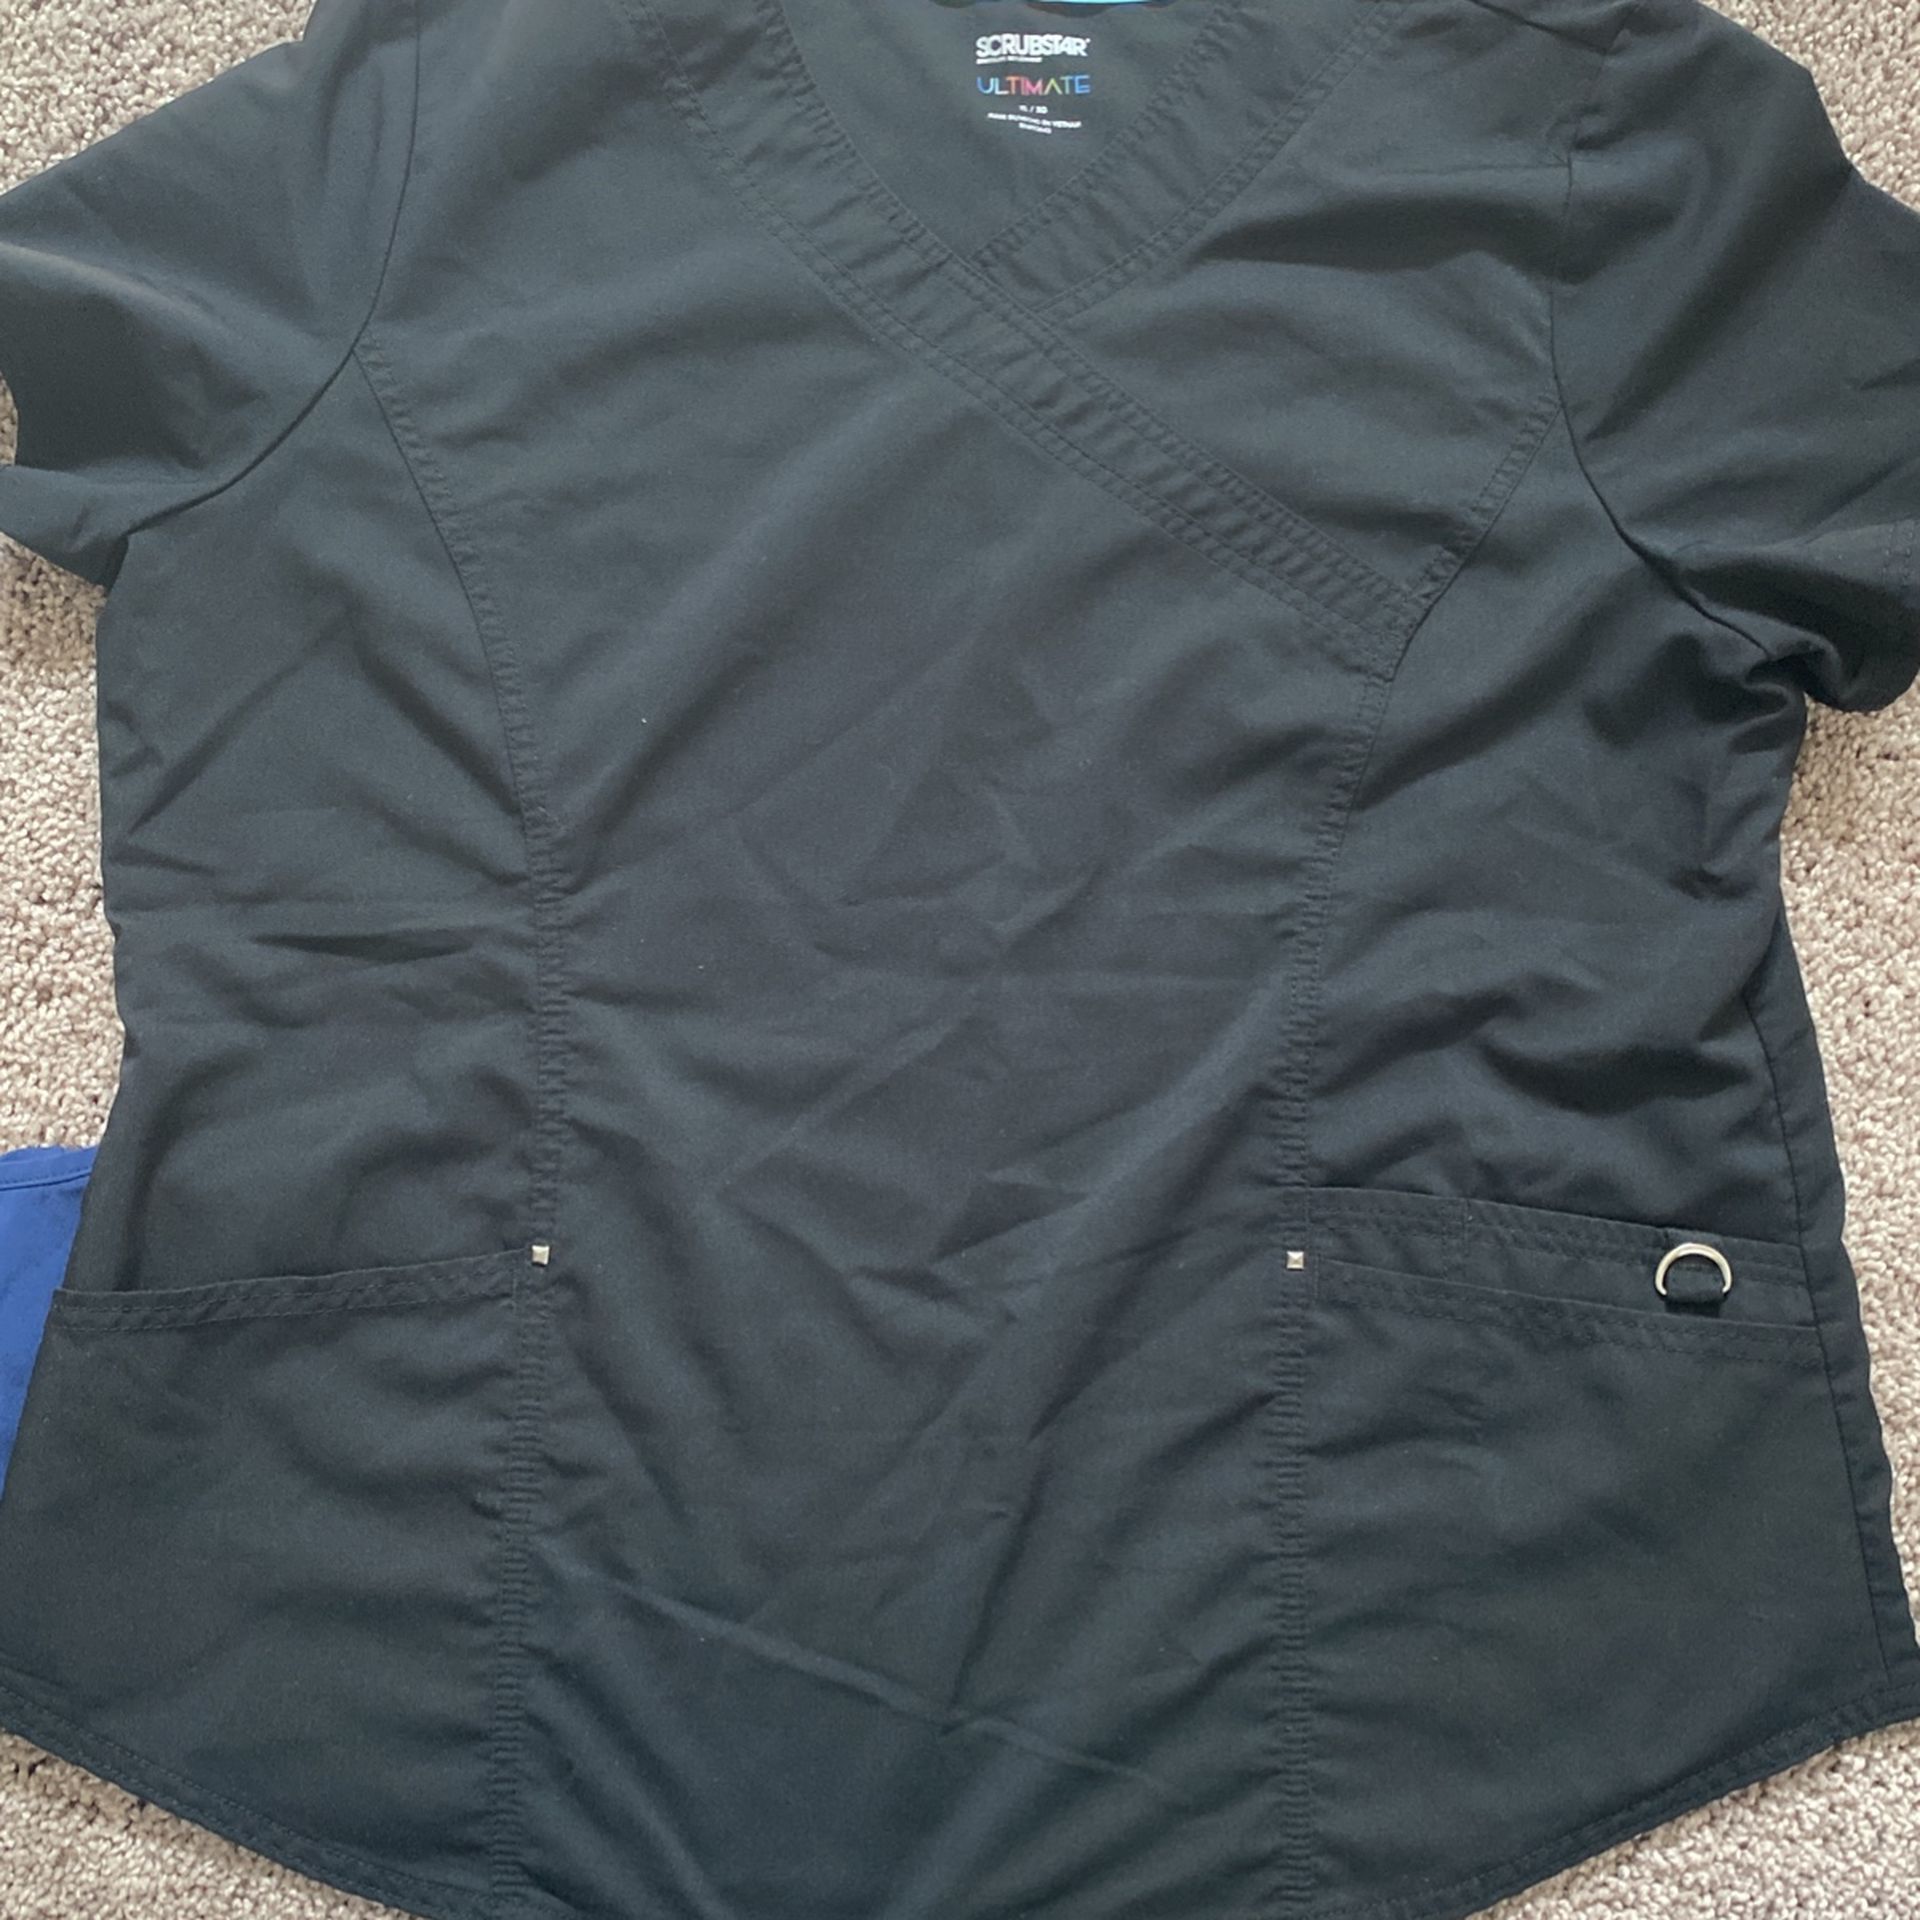 Size XL . $6 Each Or $15 For All Scrub Tops for Woman - Soft Stretch, V-Neck Top Scrubs with 3 Pockets, Easy Care 